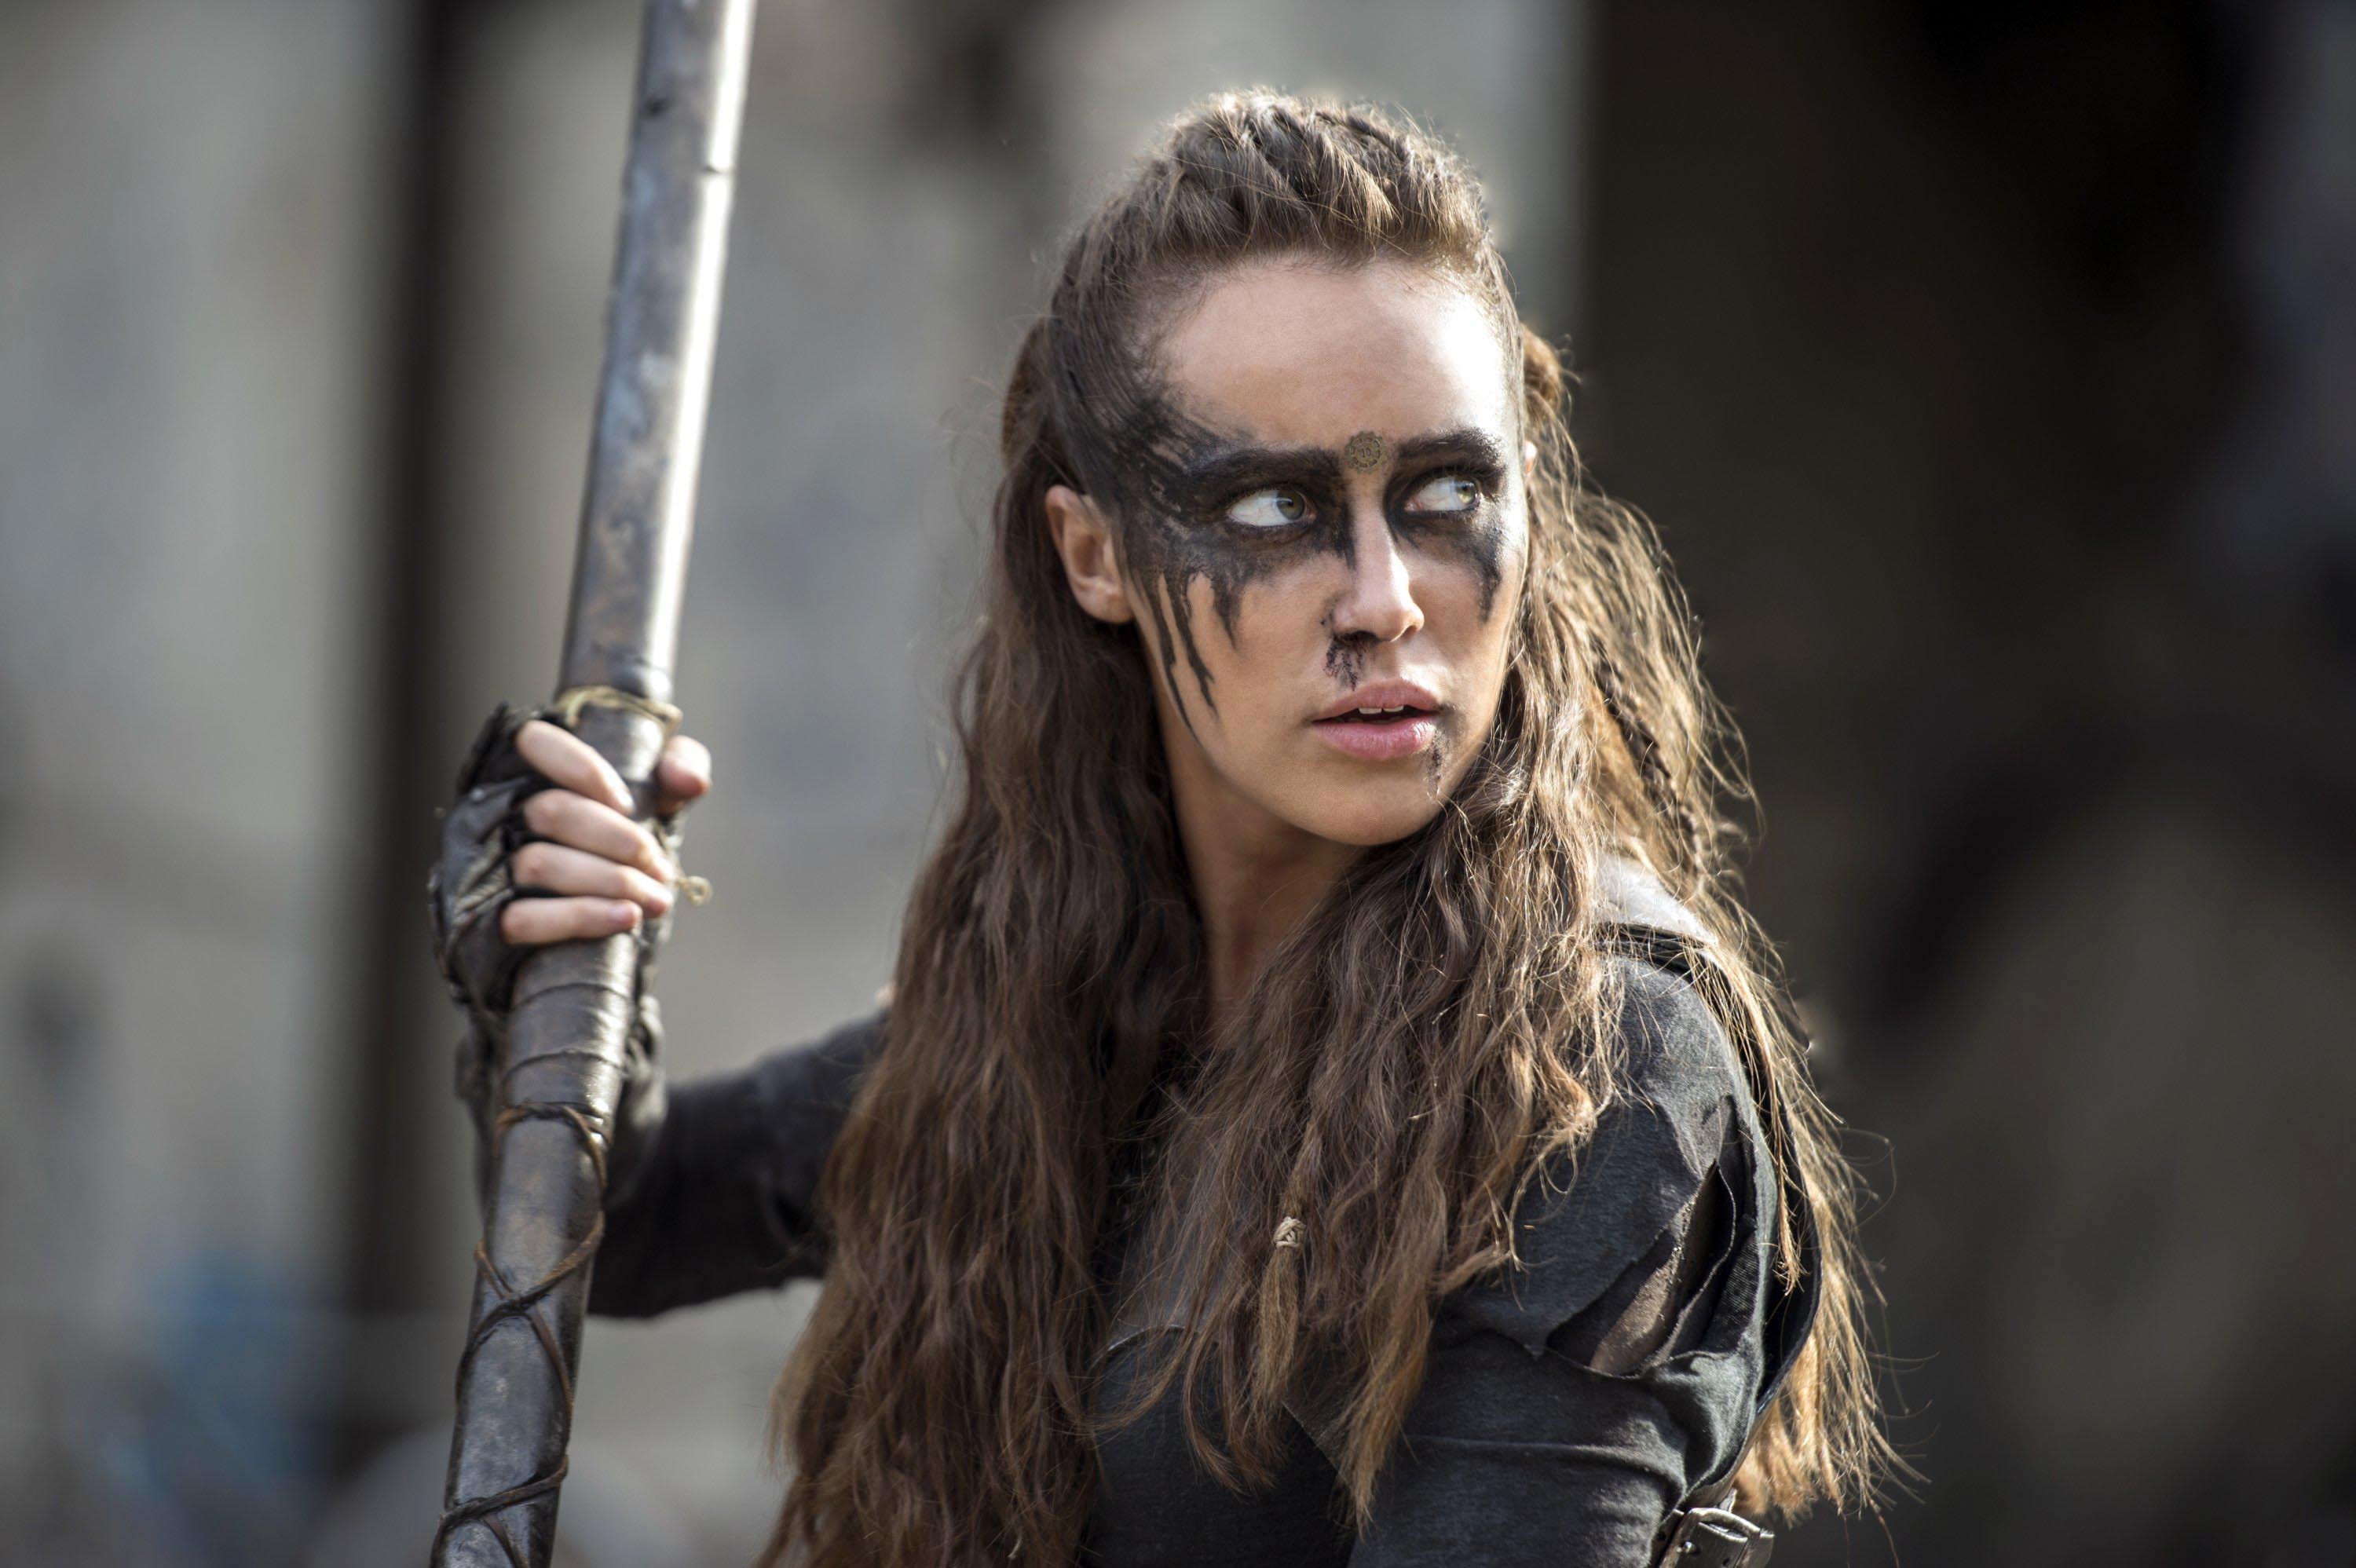 Lexa looking fierce while holding a weapon